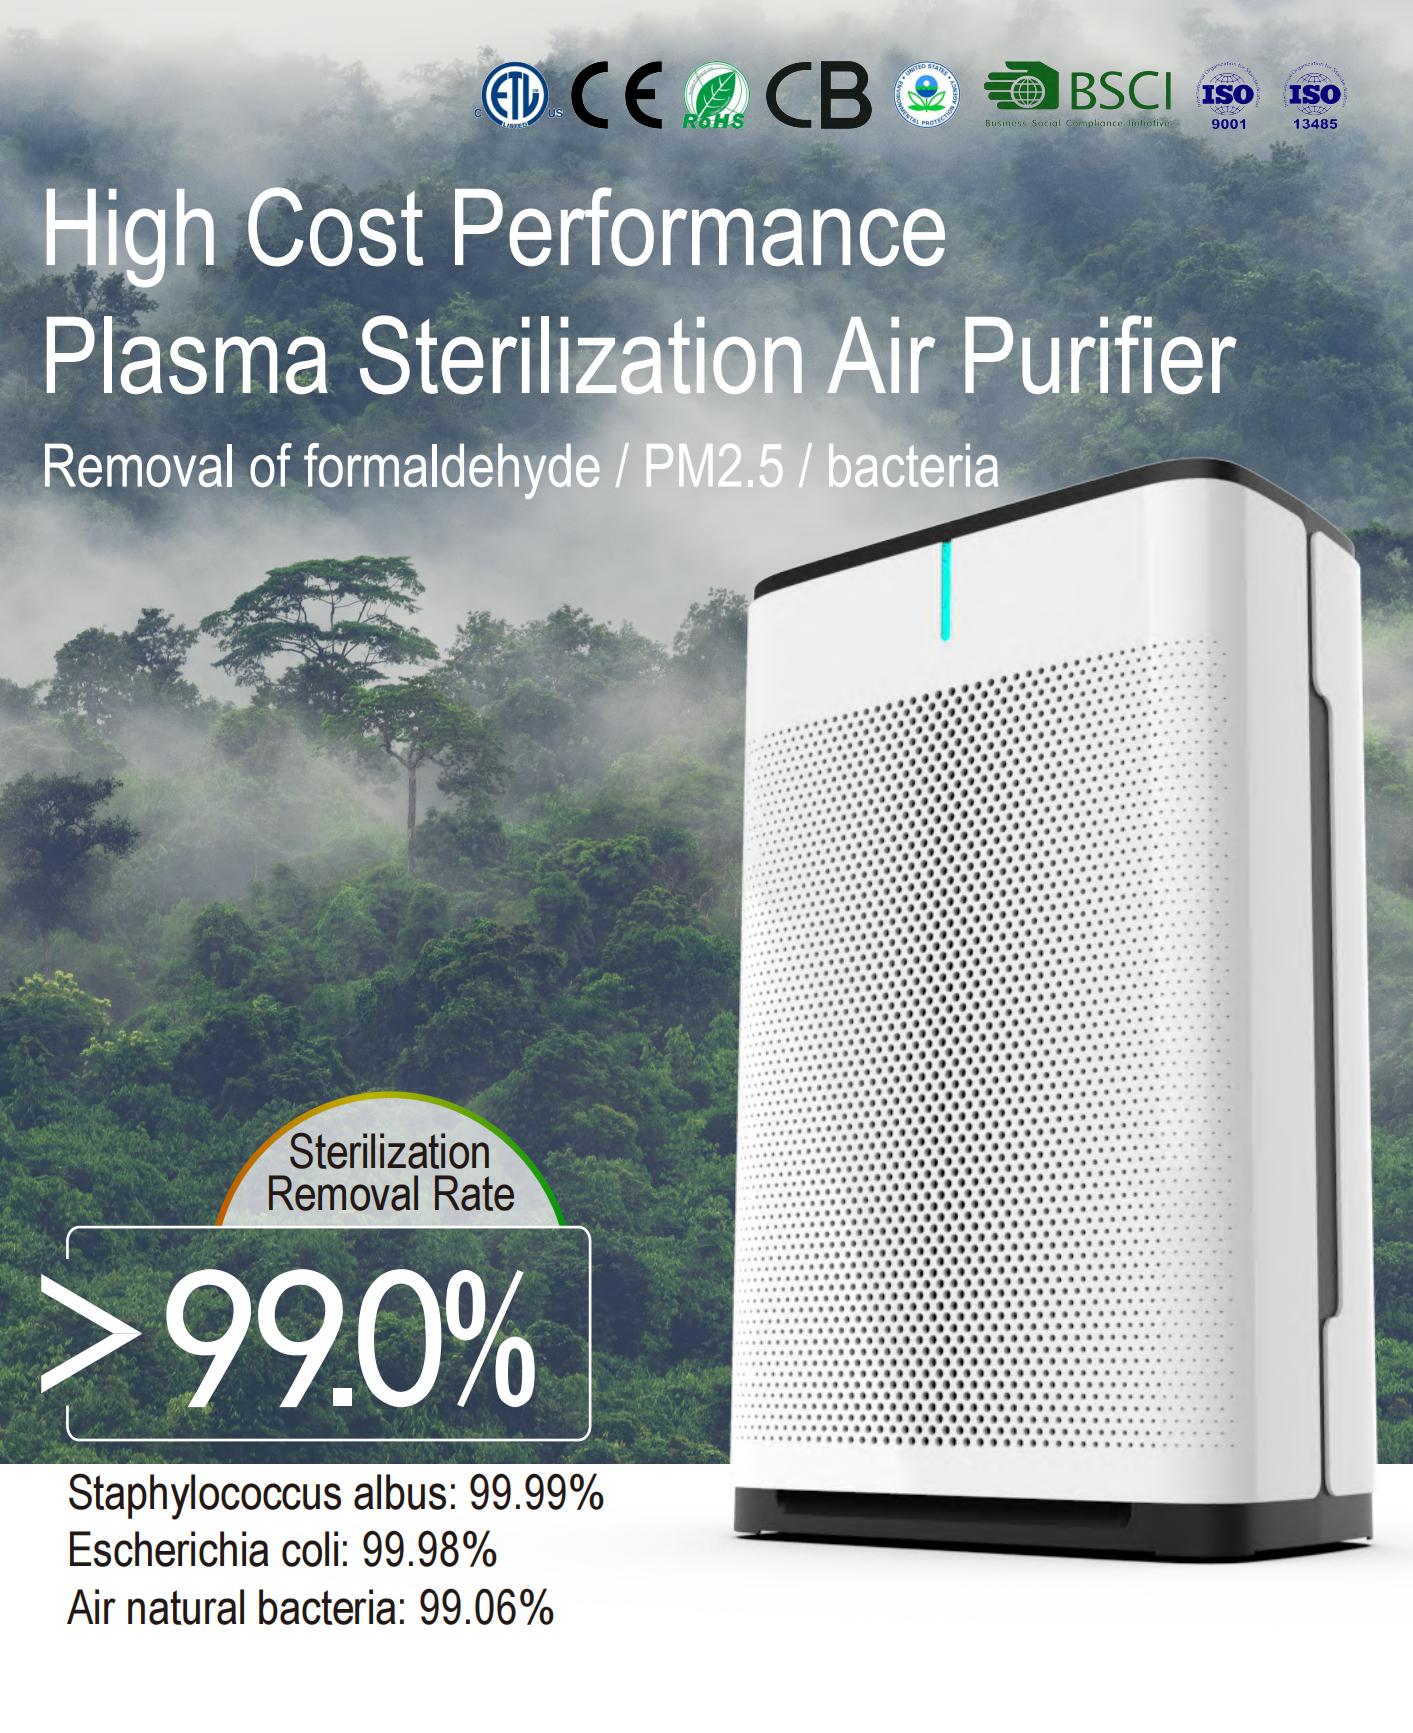 OEM/ODM air purifier manufacturers analyze the working principle of air purifiers